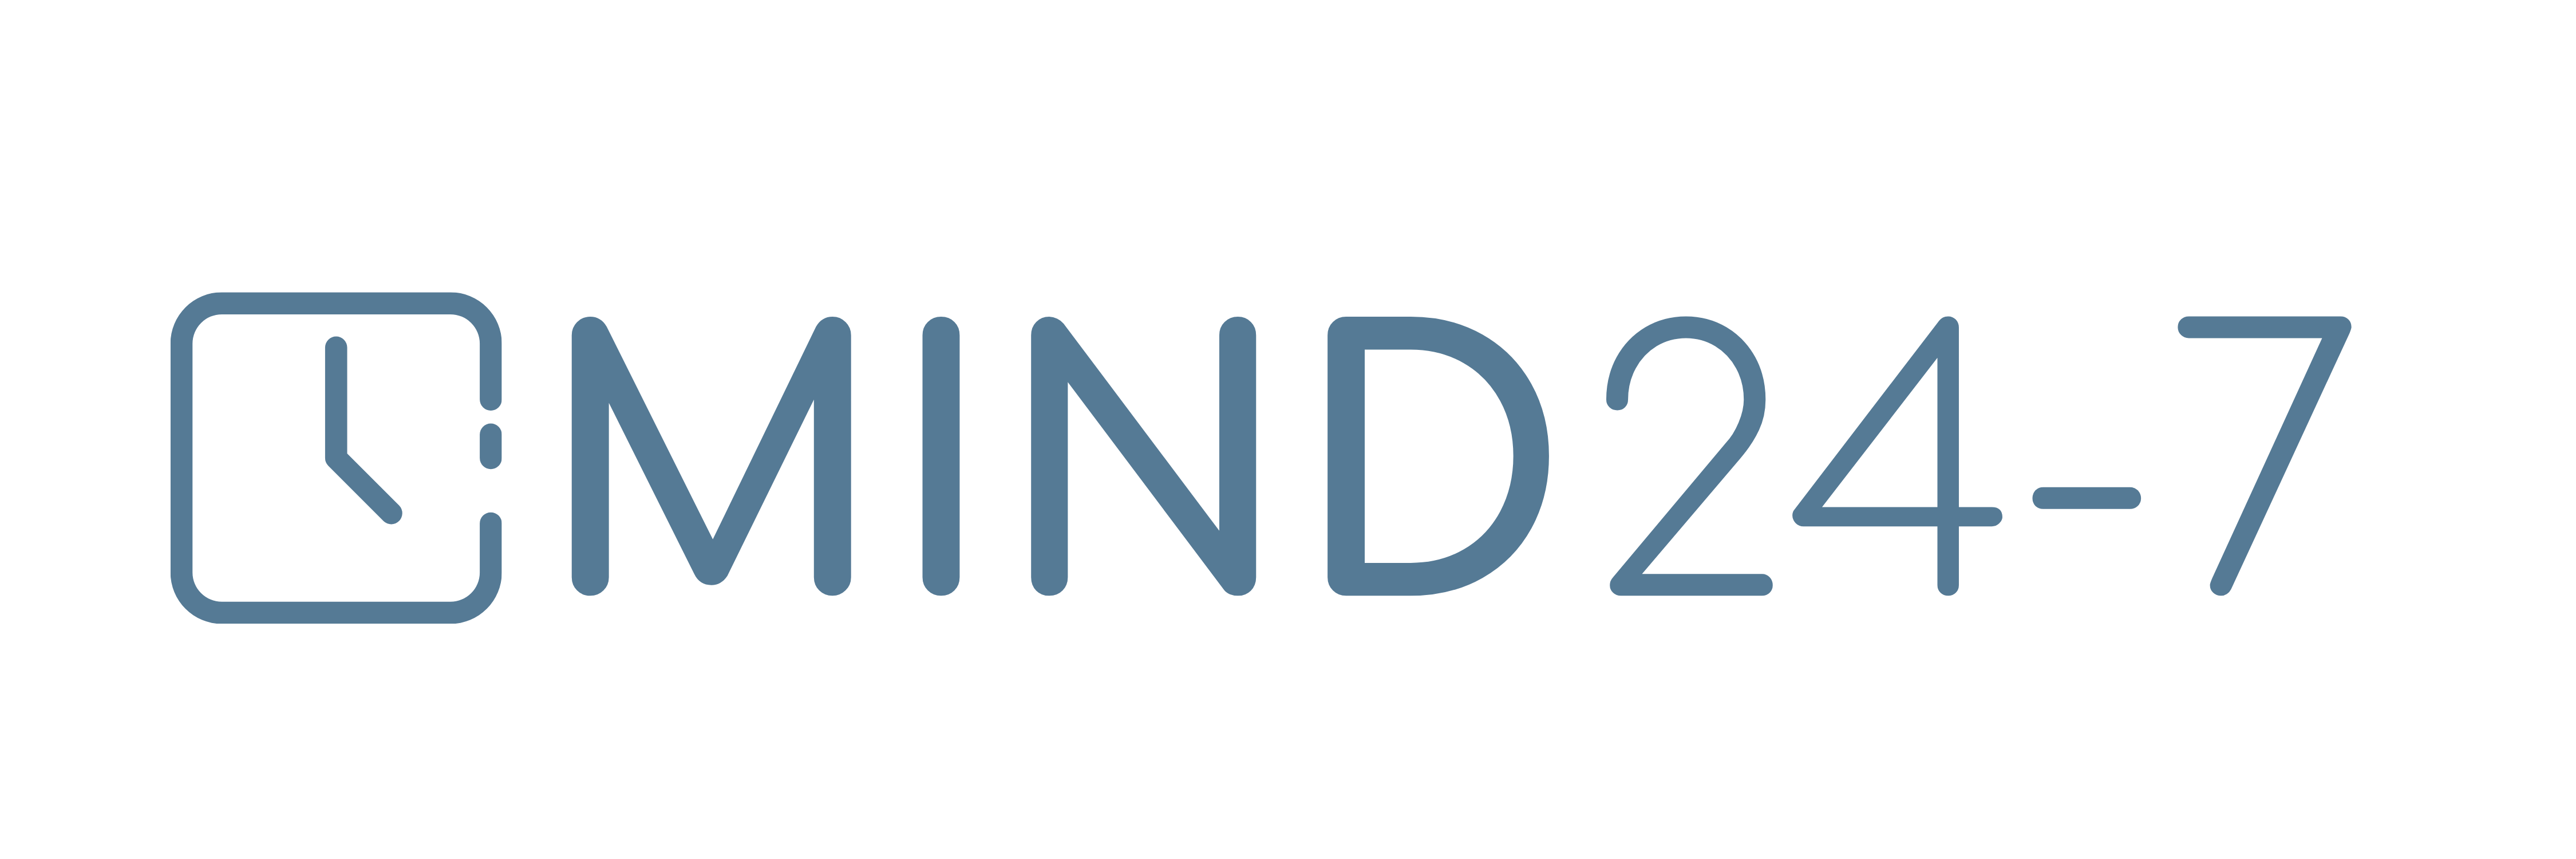 MIND 24-7 Secures $20 Million in Growth Financing to Support Behavioral Health Expansion